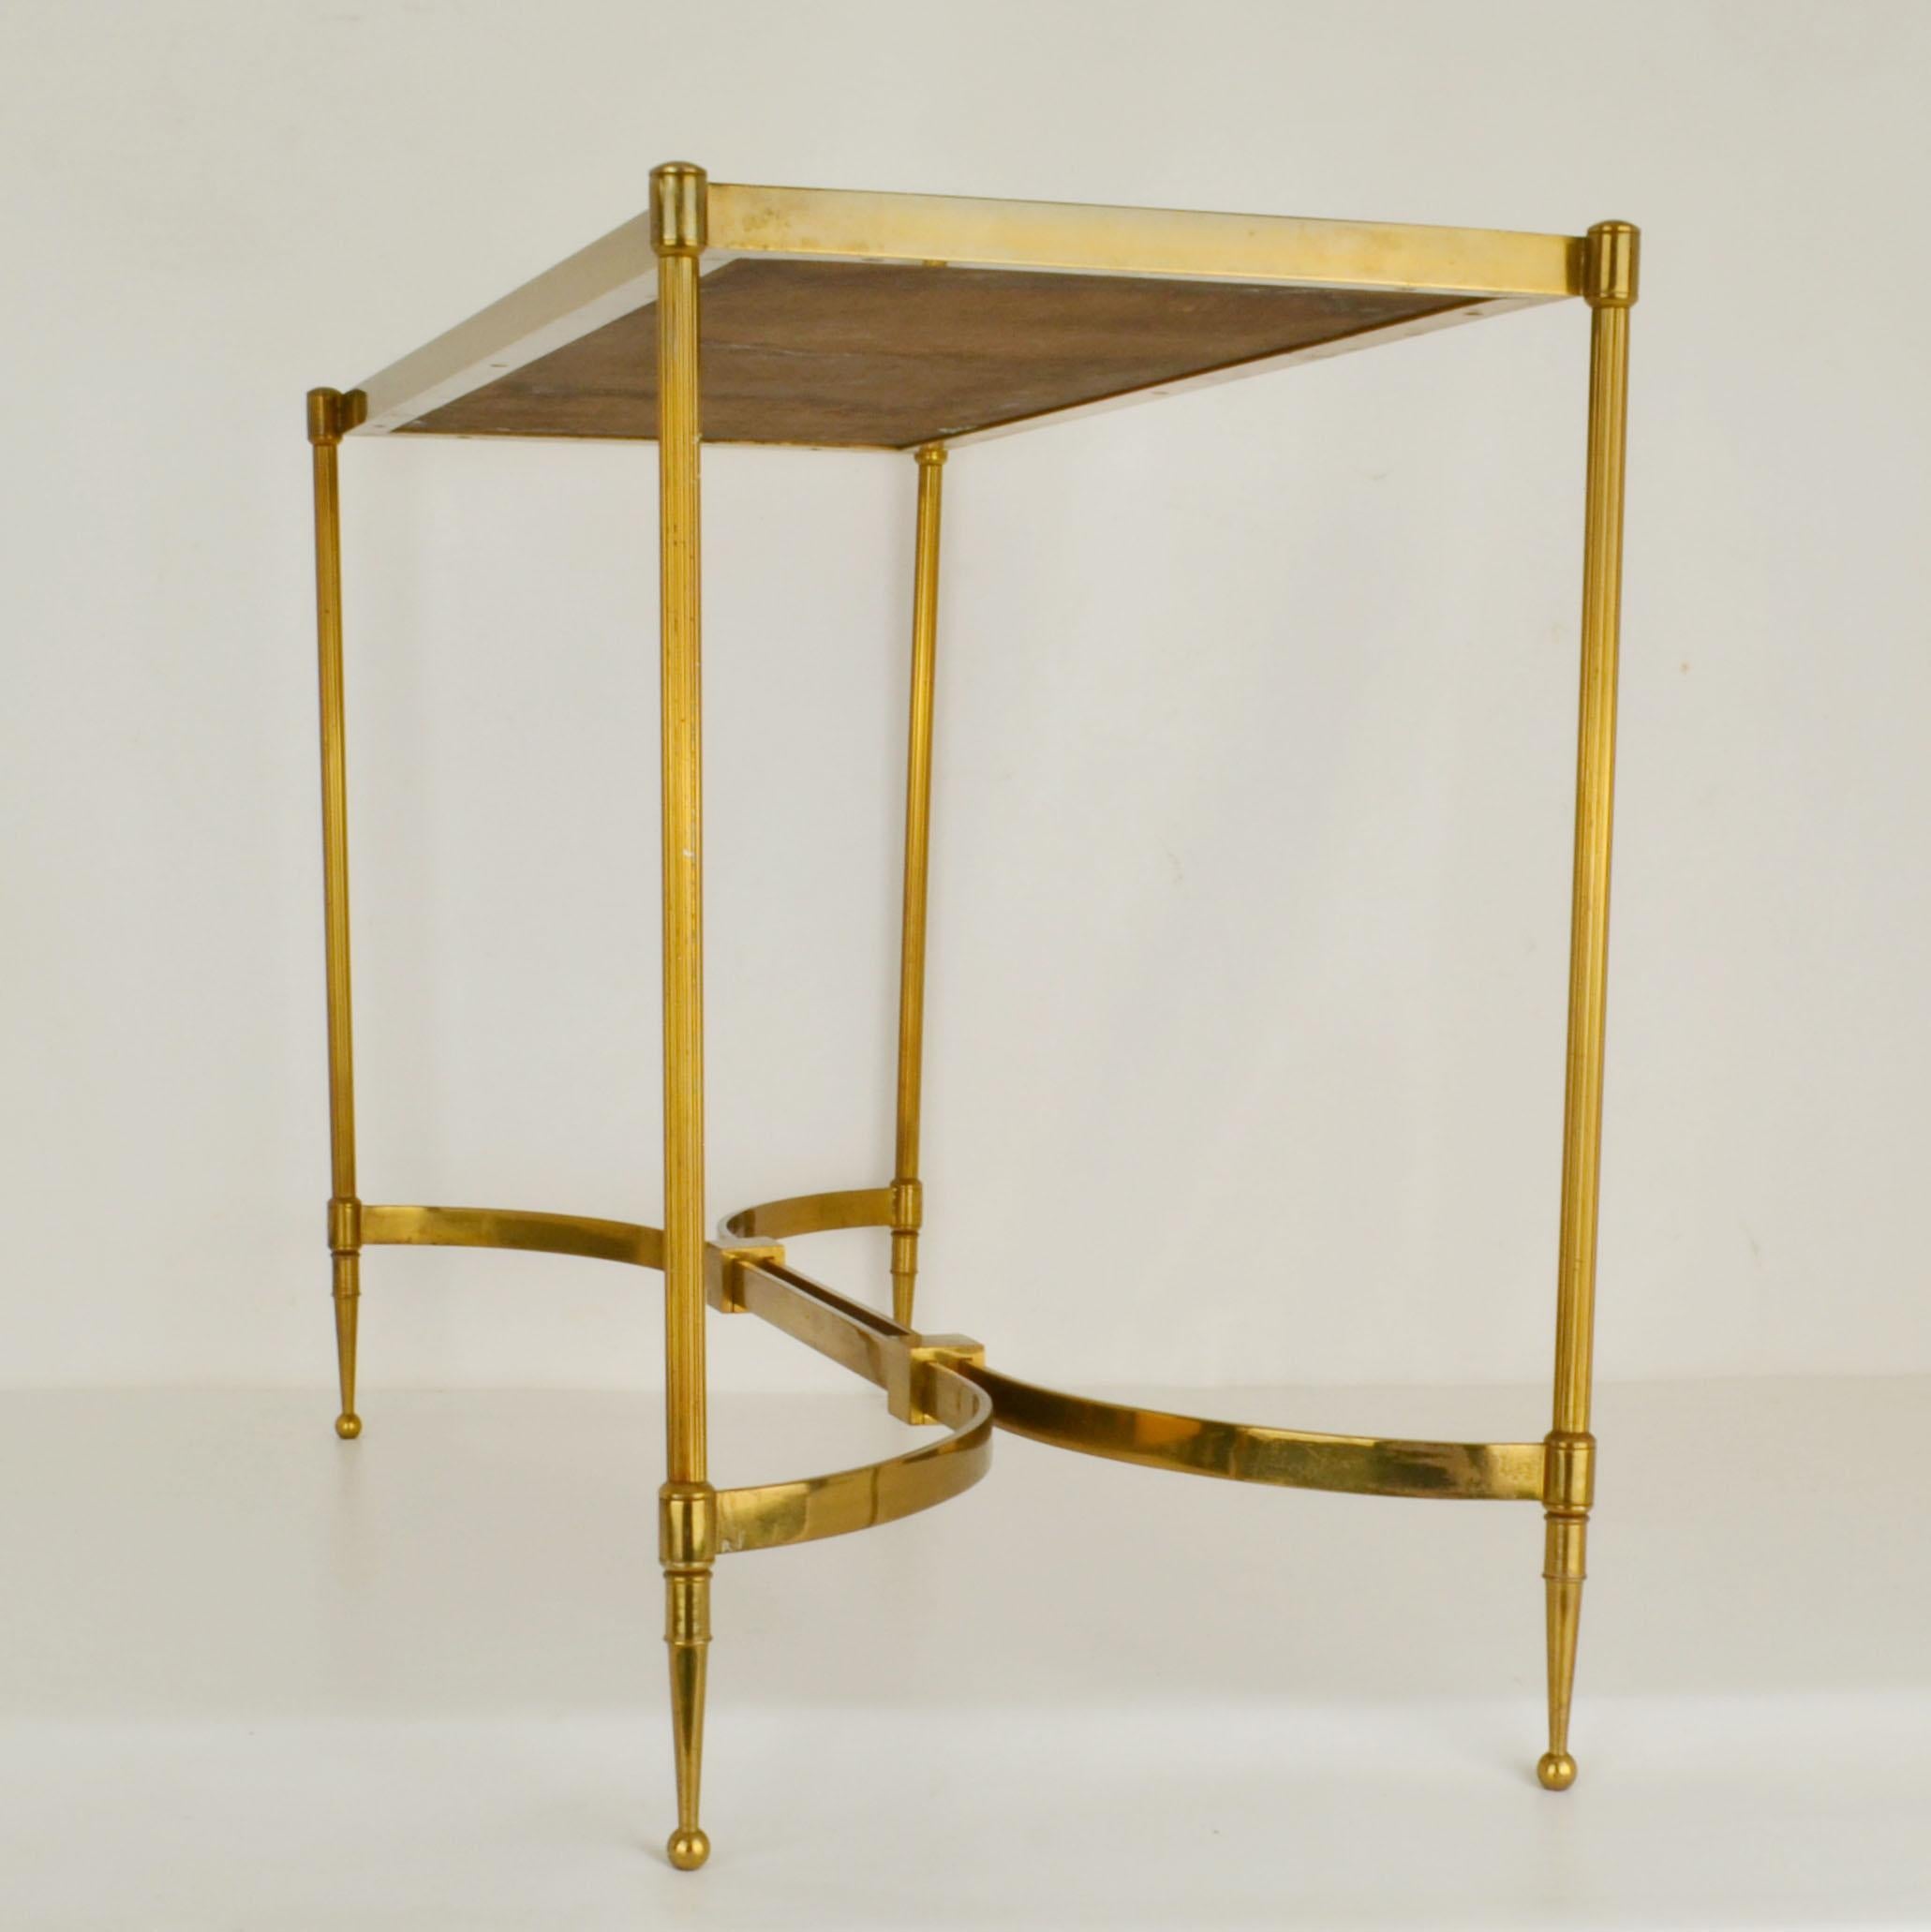 Late 20th Century French Brass Coffee Table with Mirrored Top in Hollywood Regency Style